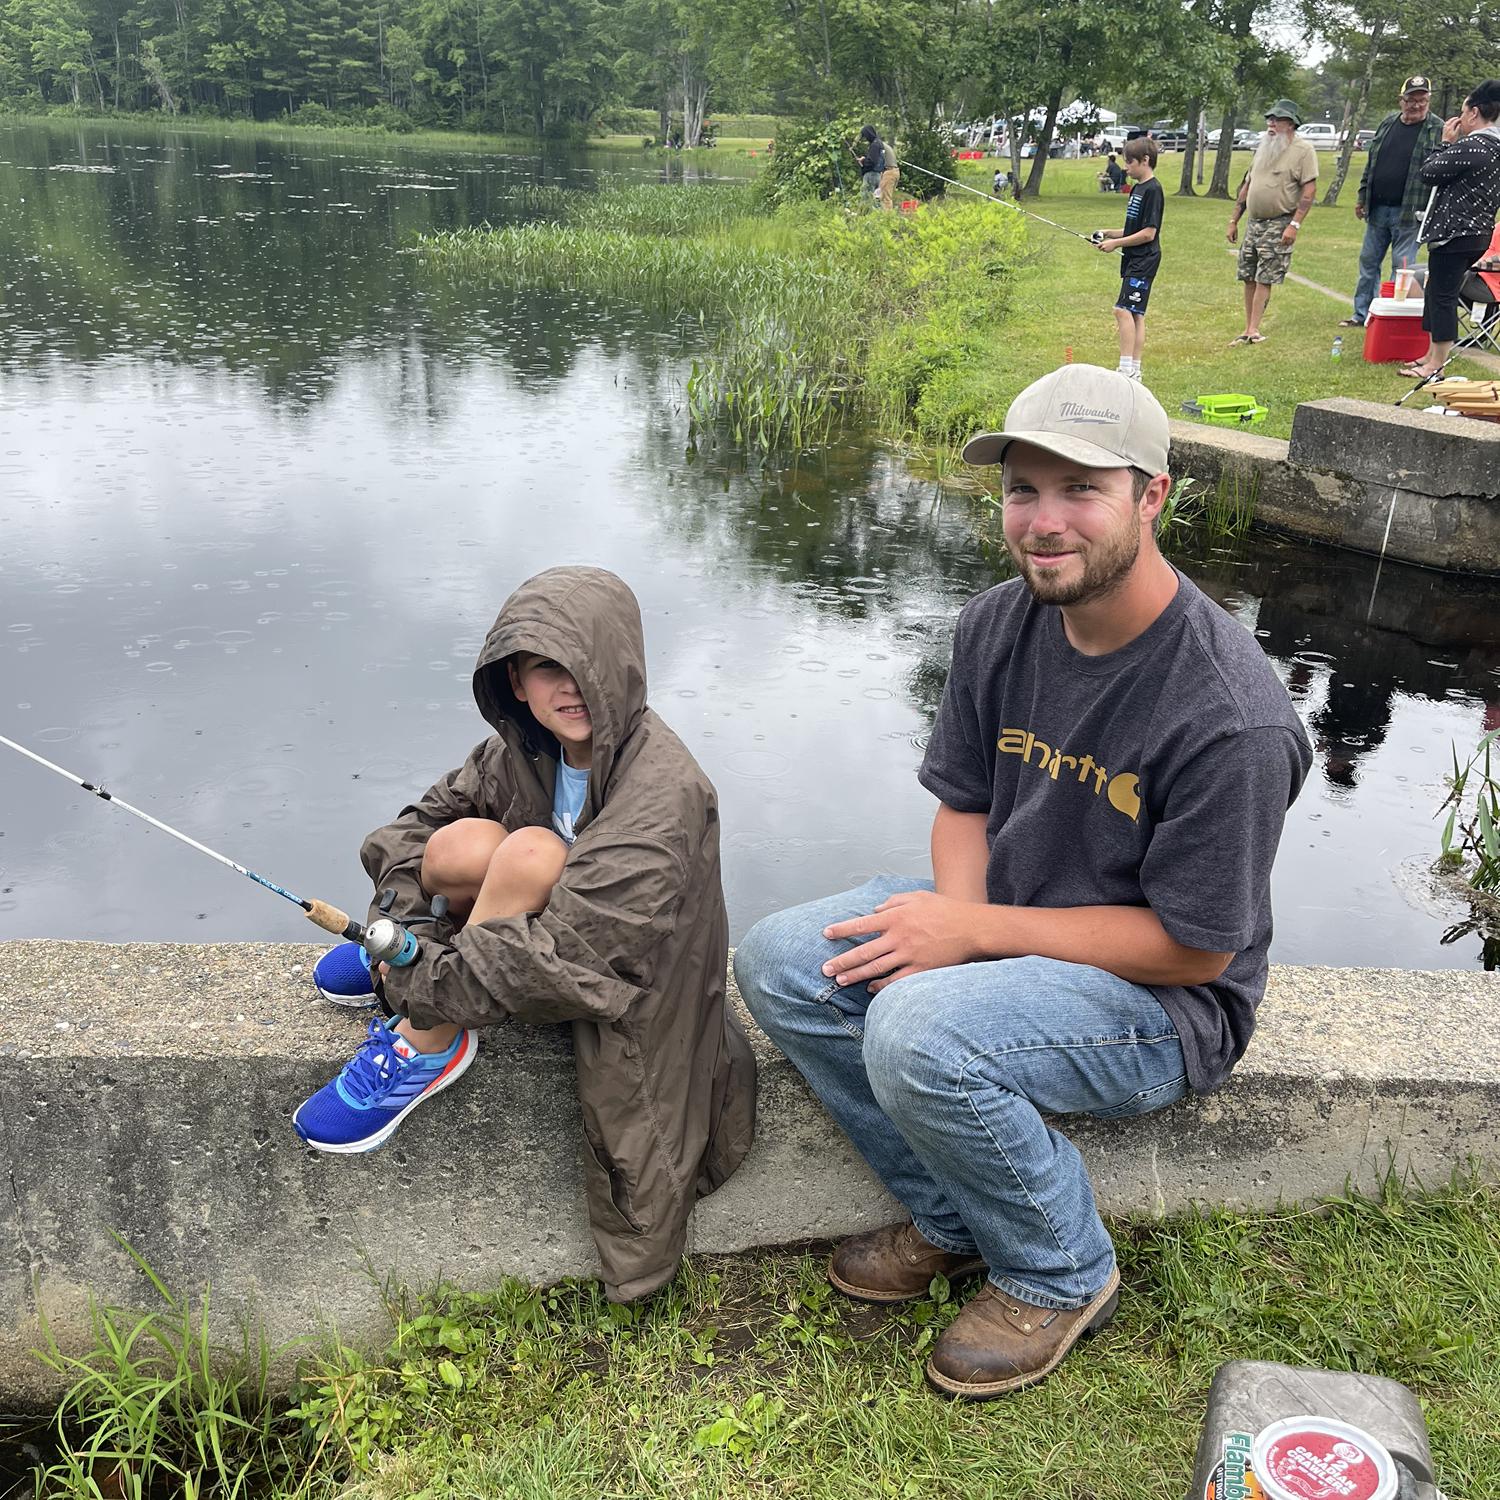 Lukes first fishing tournament! It might have been raining but that didnt stop Luke from winning first prize